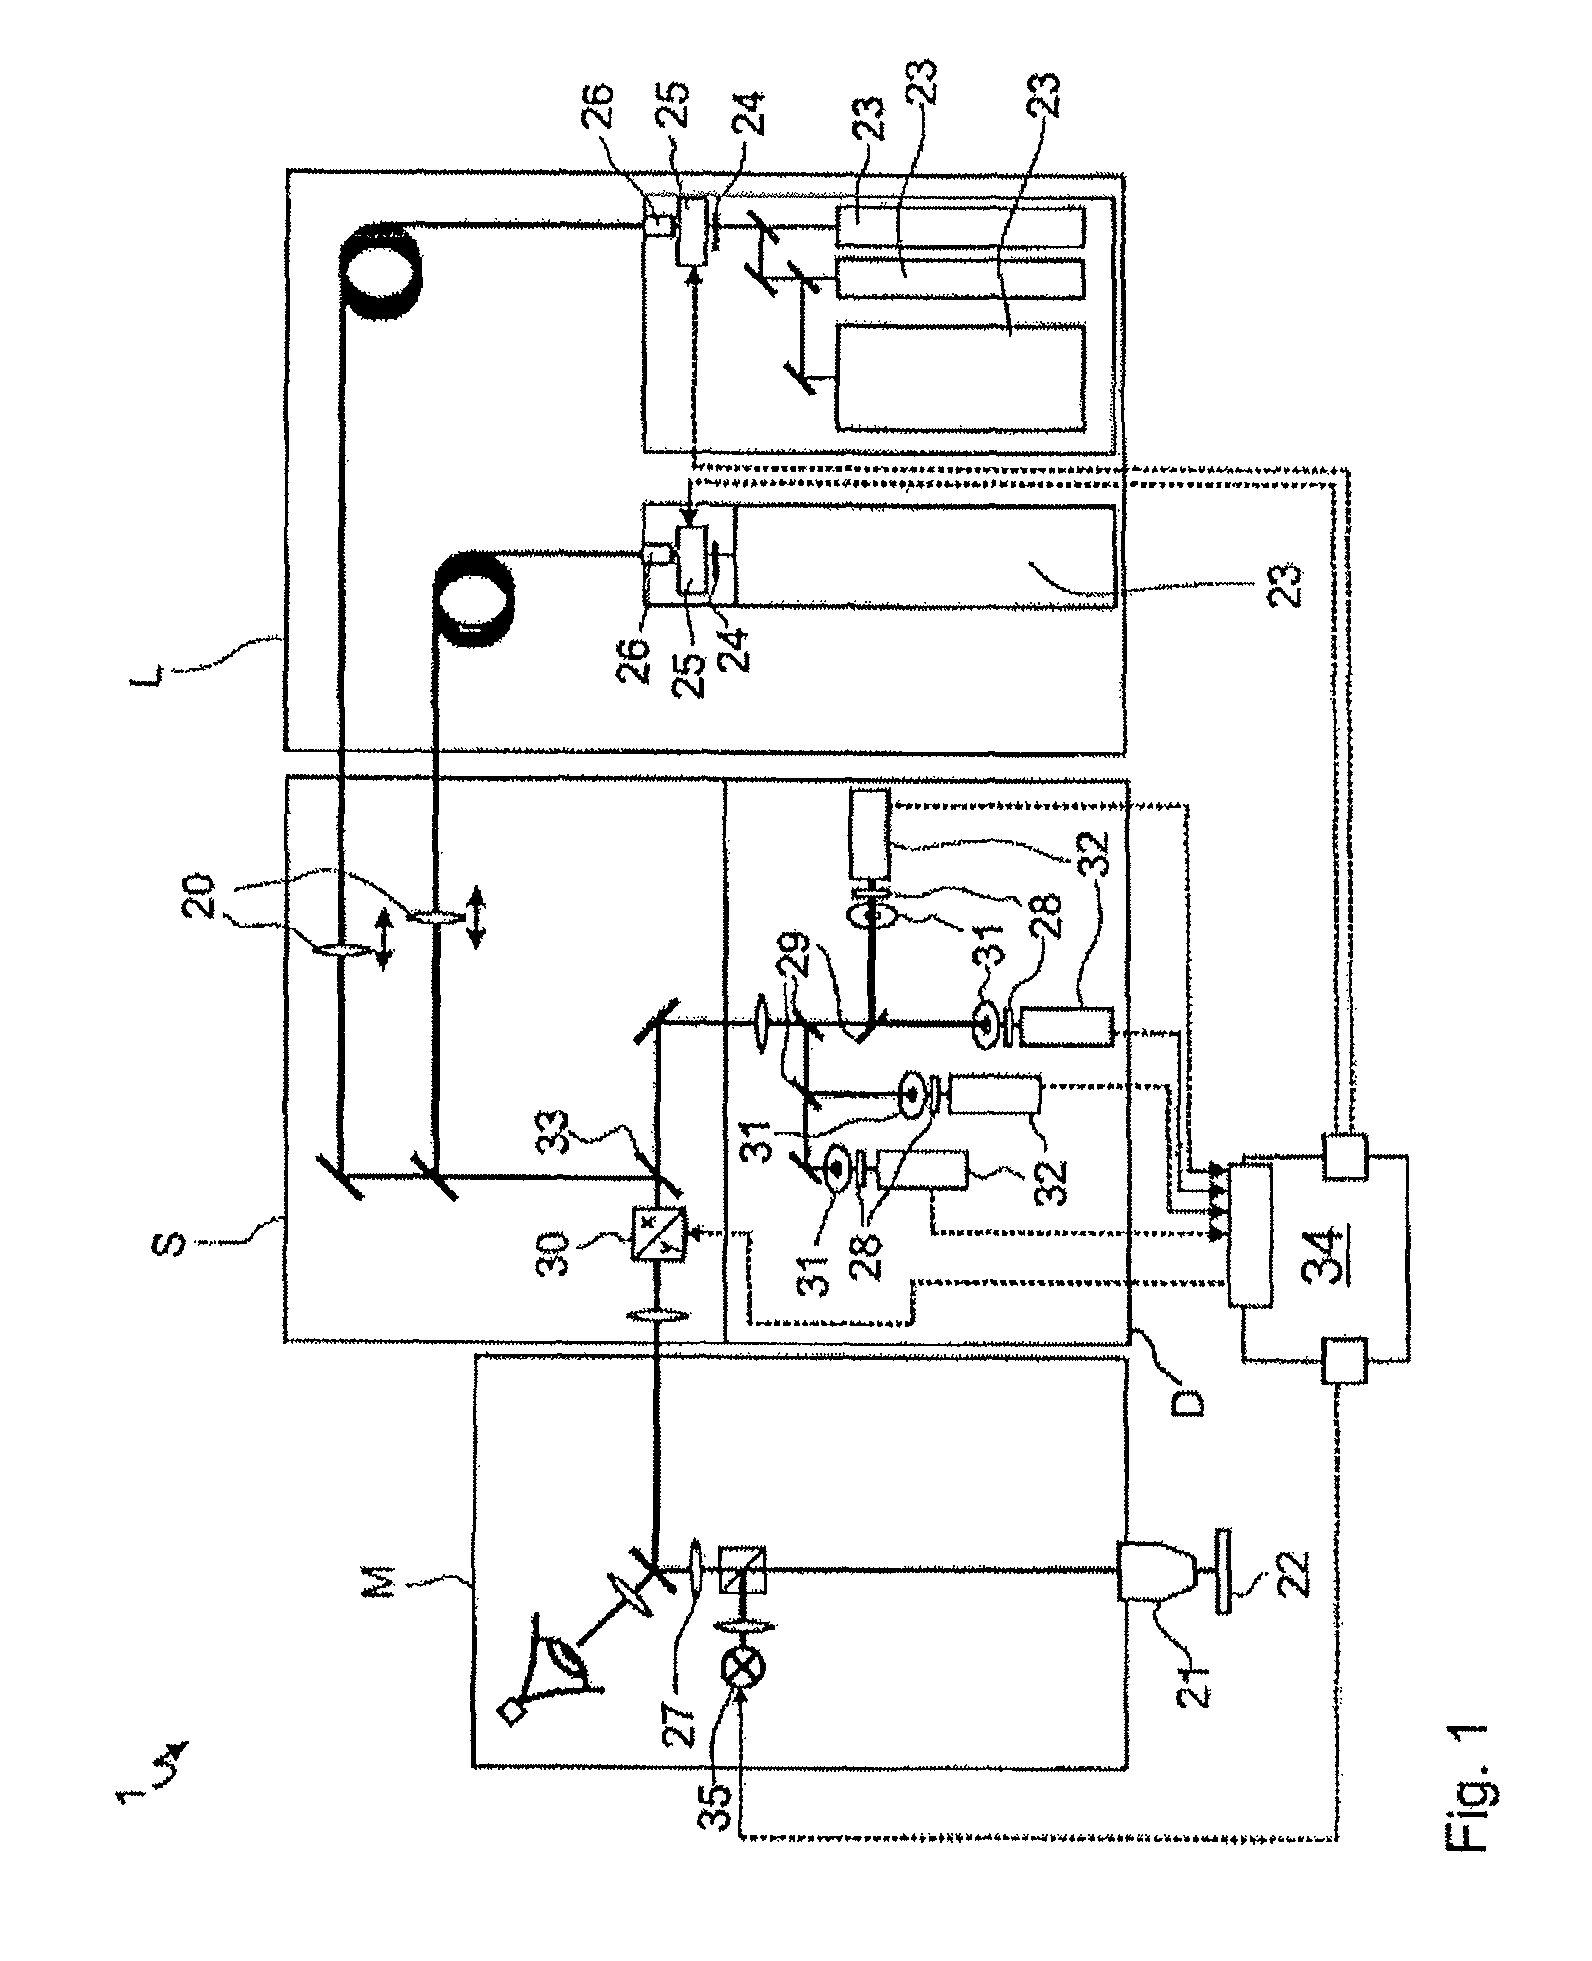 Method for generating images with an expanded dynamic range and optical device for carrying out such a method, in particular a laser scanner microscope